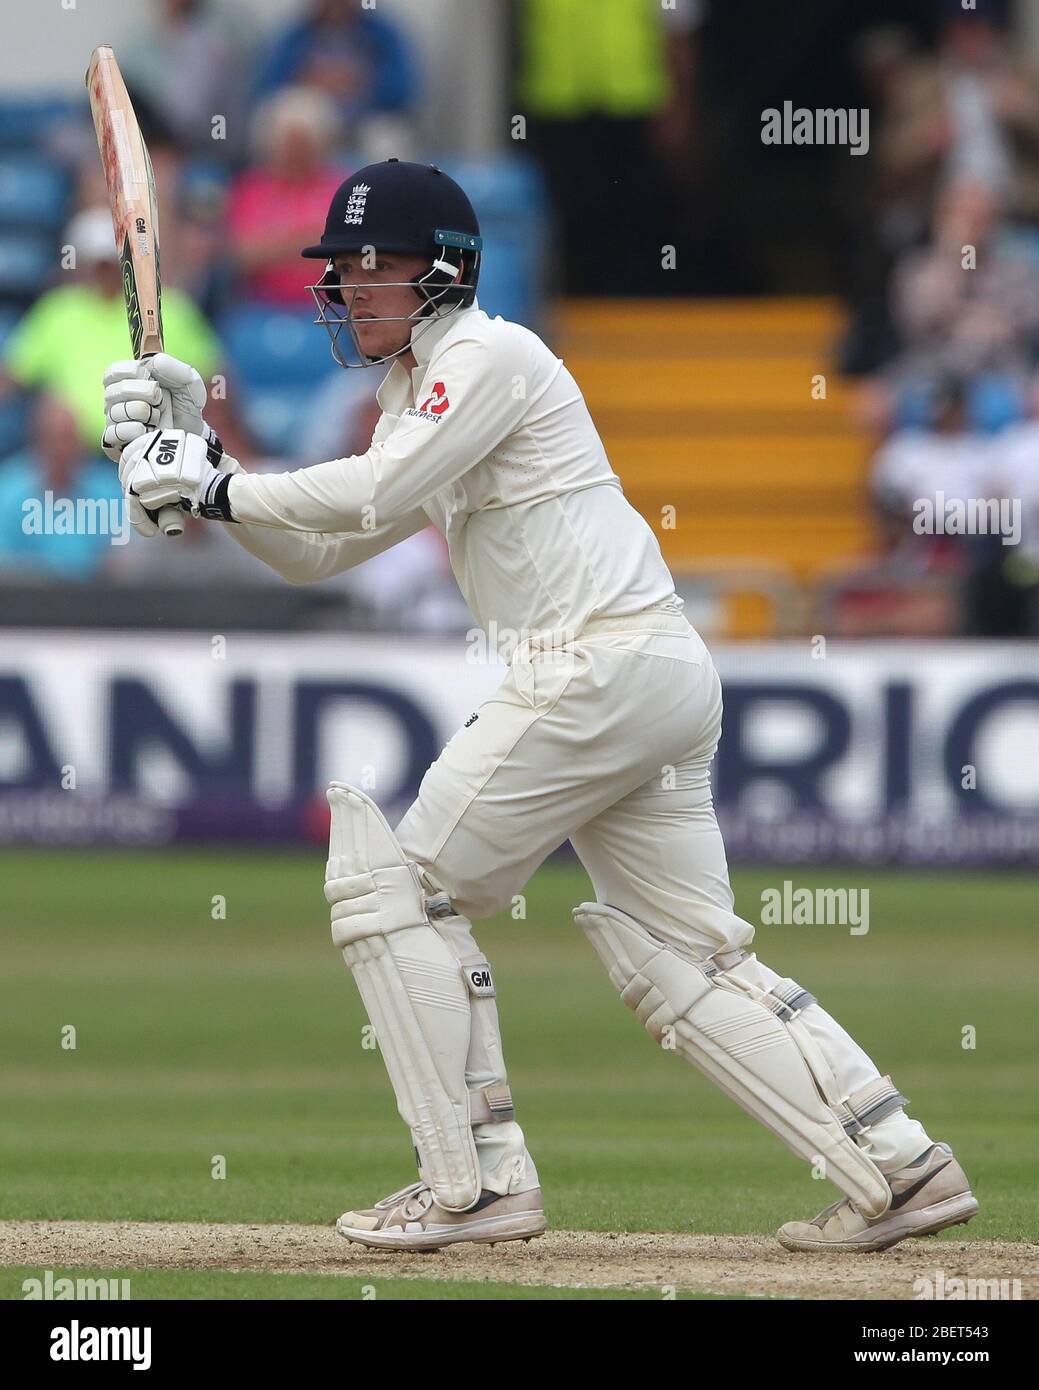 LEEDS, UK - JUNE 1ST England's Dom Bess batting during the first day of the Second Nat West Test match between England and Pakistan at Headingley Cricket Ground, Leeds on Friday 1st June 2018. (Credit: Mark Fletcher | MI News) Stock Photo